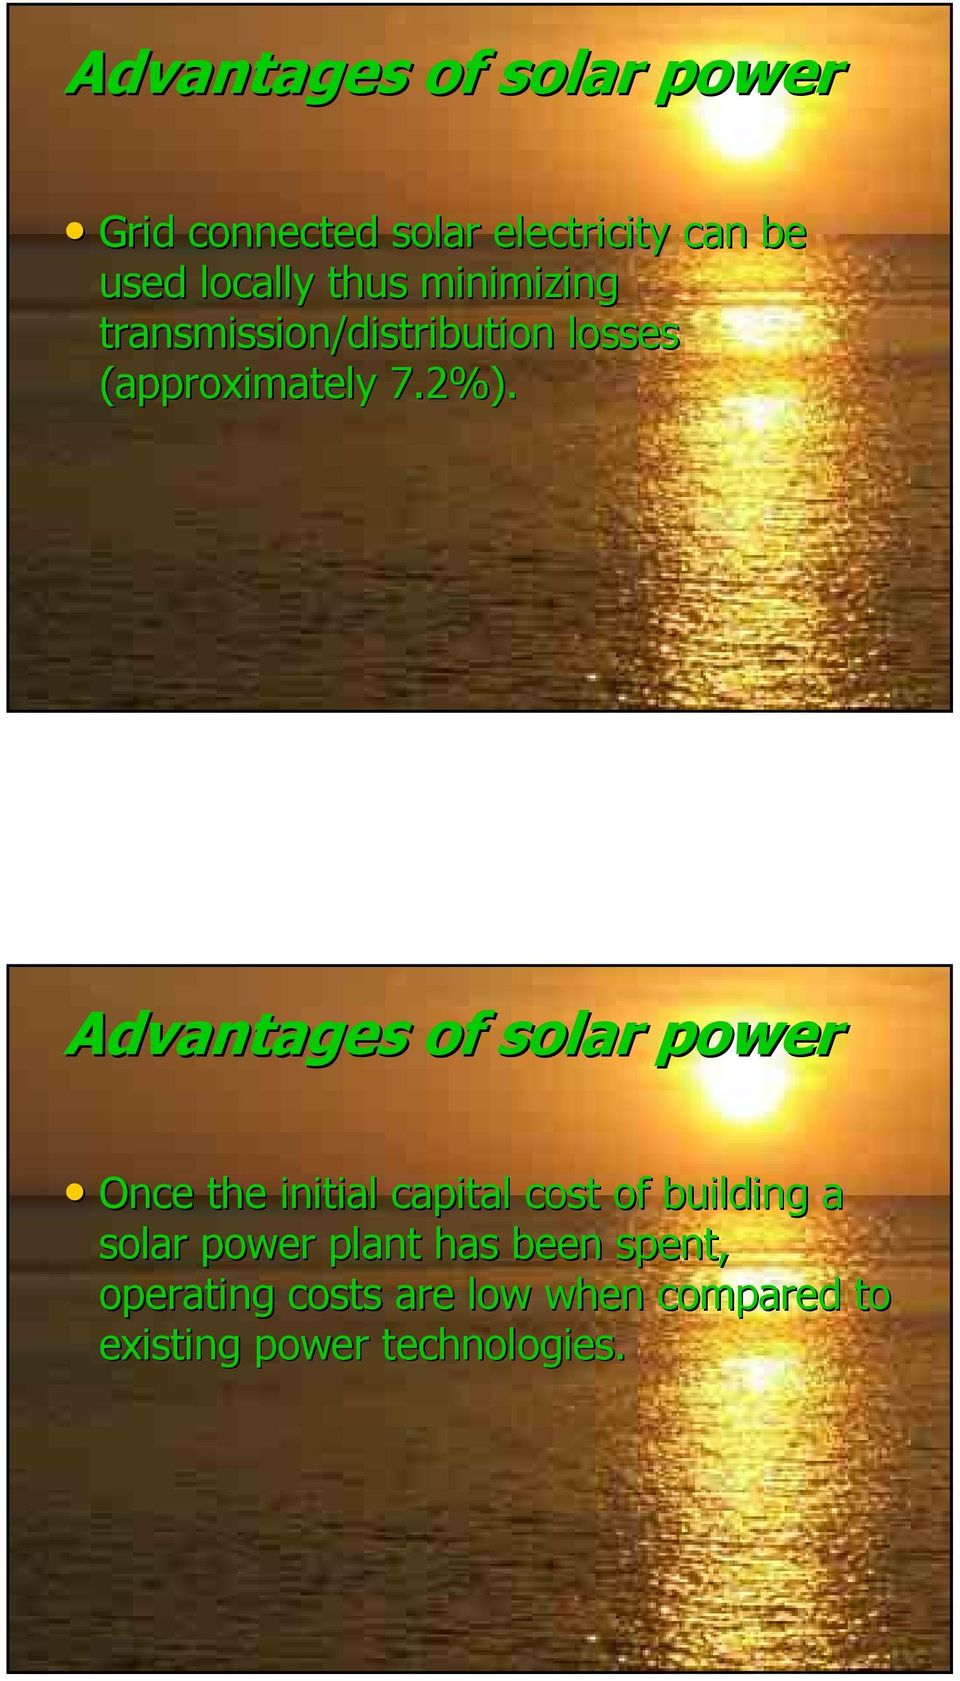 Advantages of solar power Once the initial capital cost of building a solar